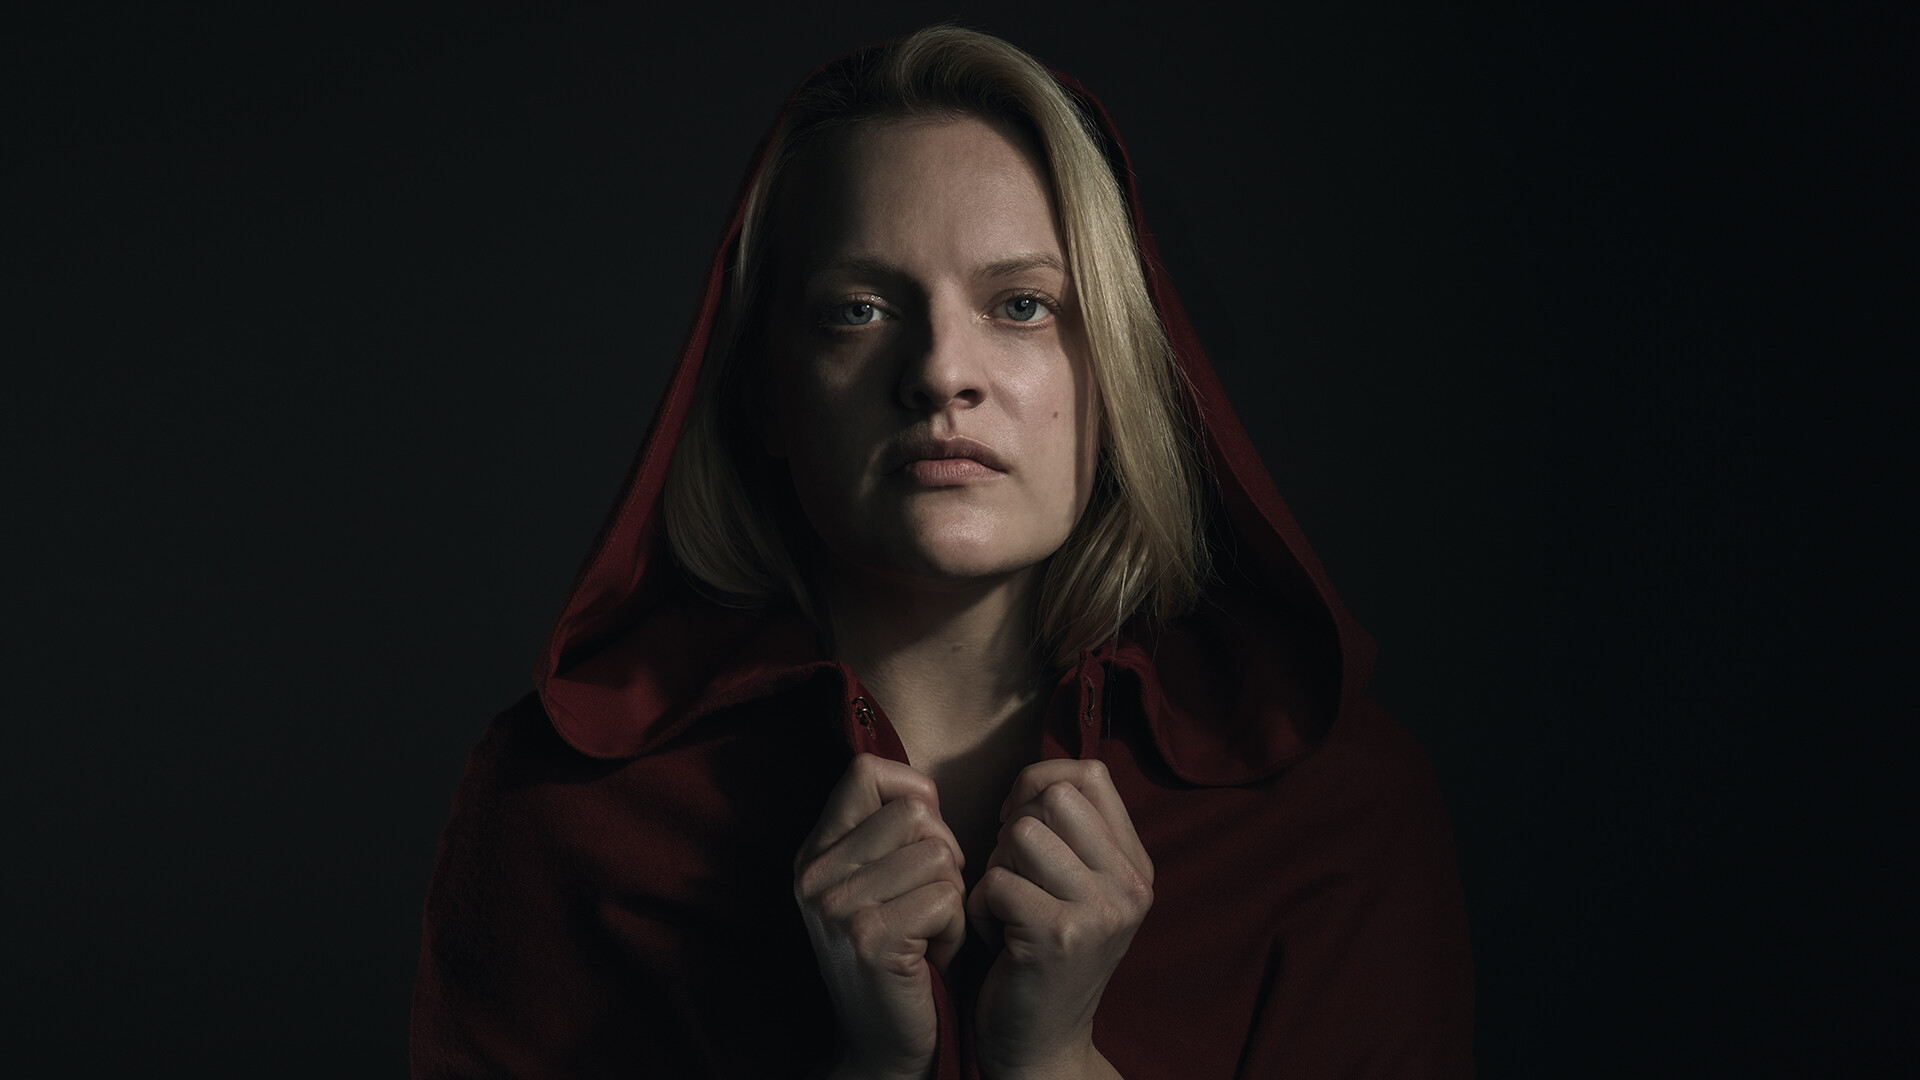 The Handmaid's Tale: A dystopian near-future, The totalitarian and Christian fundamentalist government of Gilead. 1920x1080 Full HD Wallpaper.